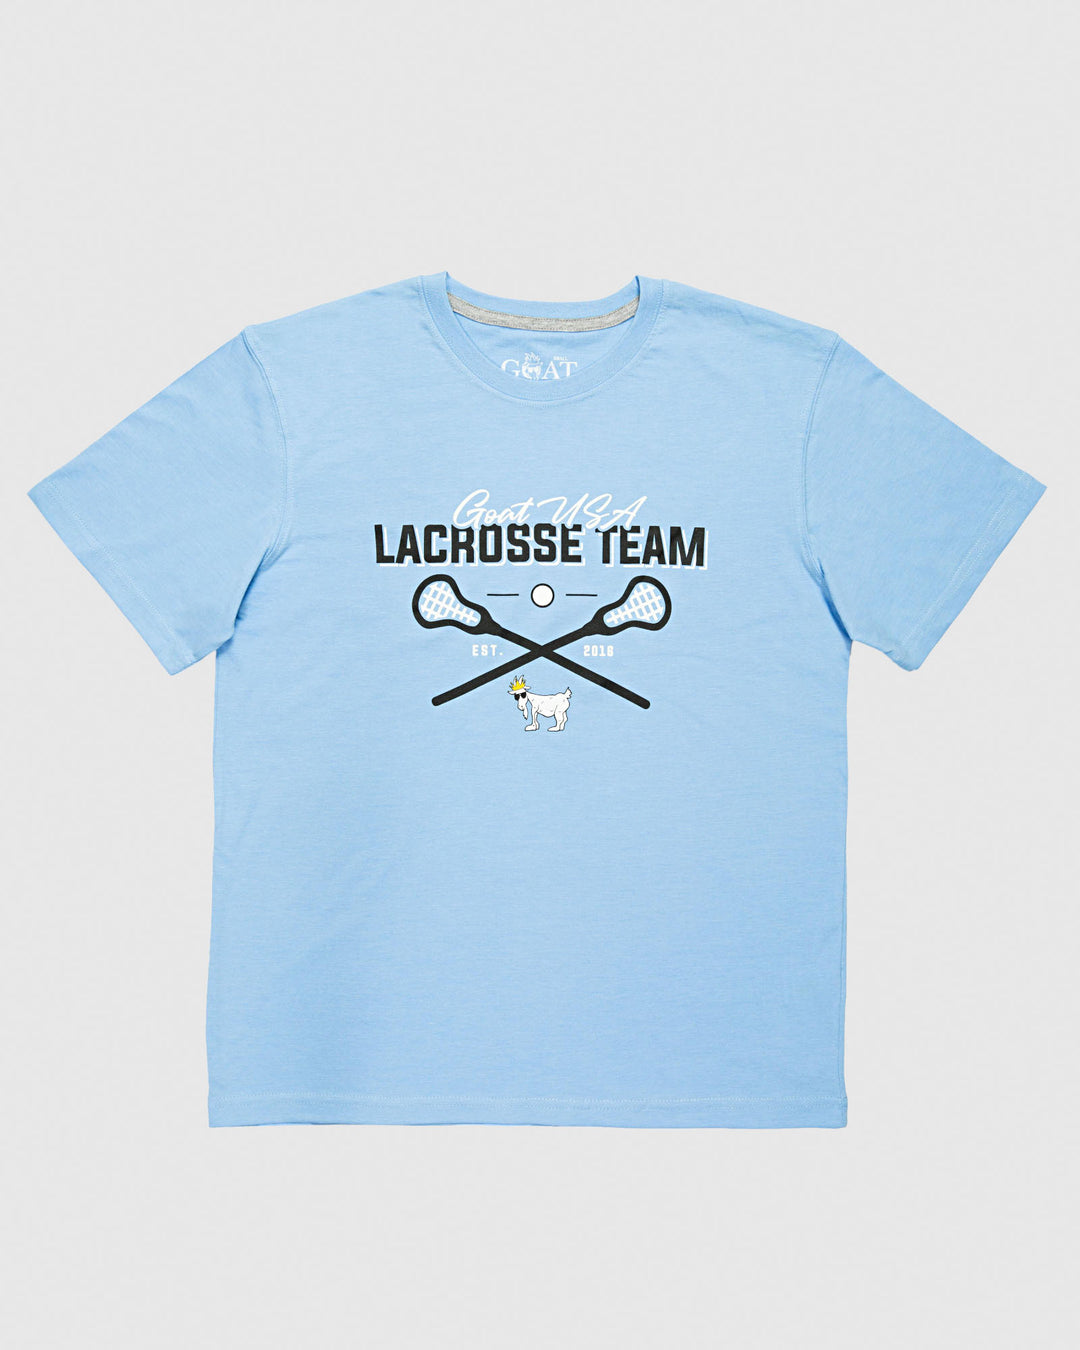 Carolina blue shirt that reads "GOAT USA LACROSSE TEAM" with lacrosse graphic